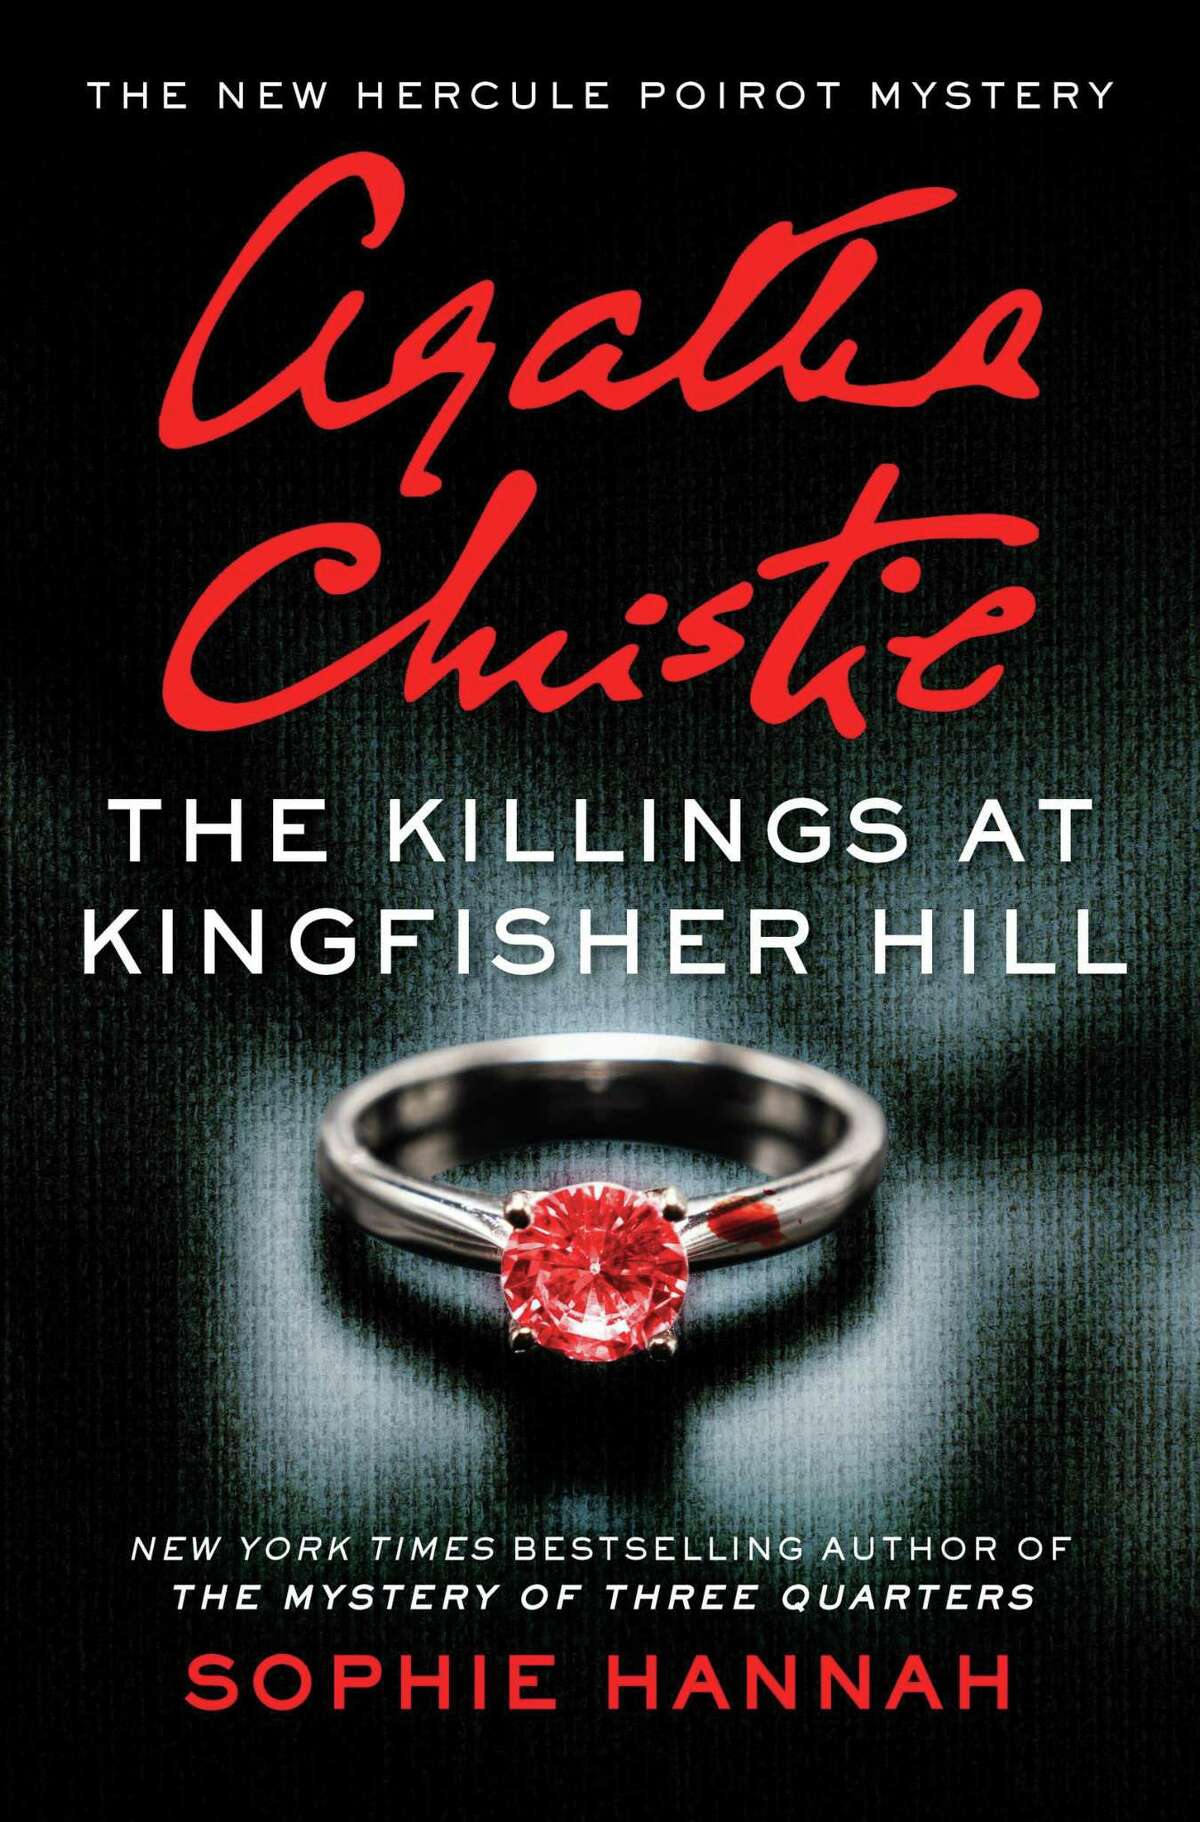 “The Killings at Kingfisher Hill” by Sophie Hannah